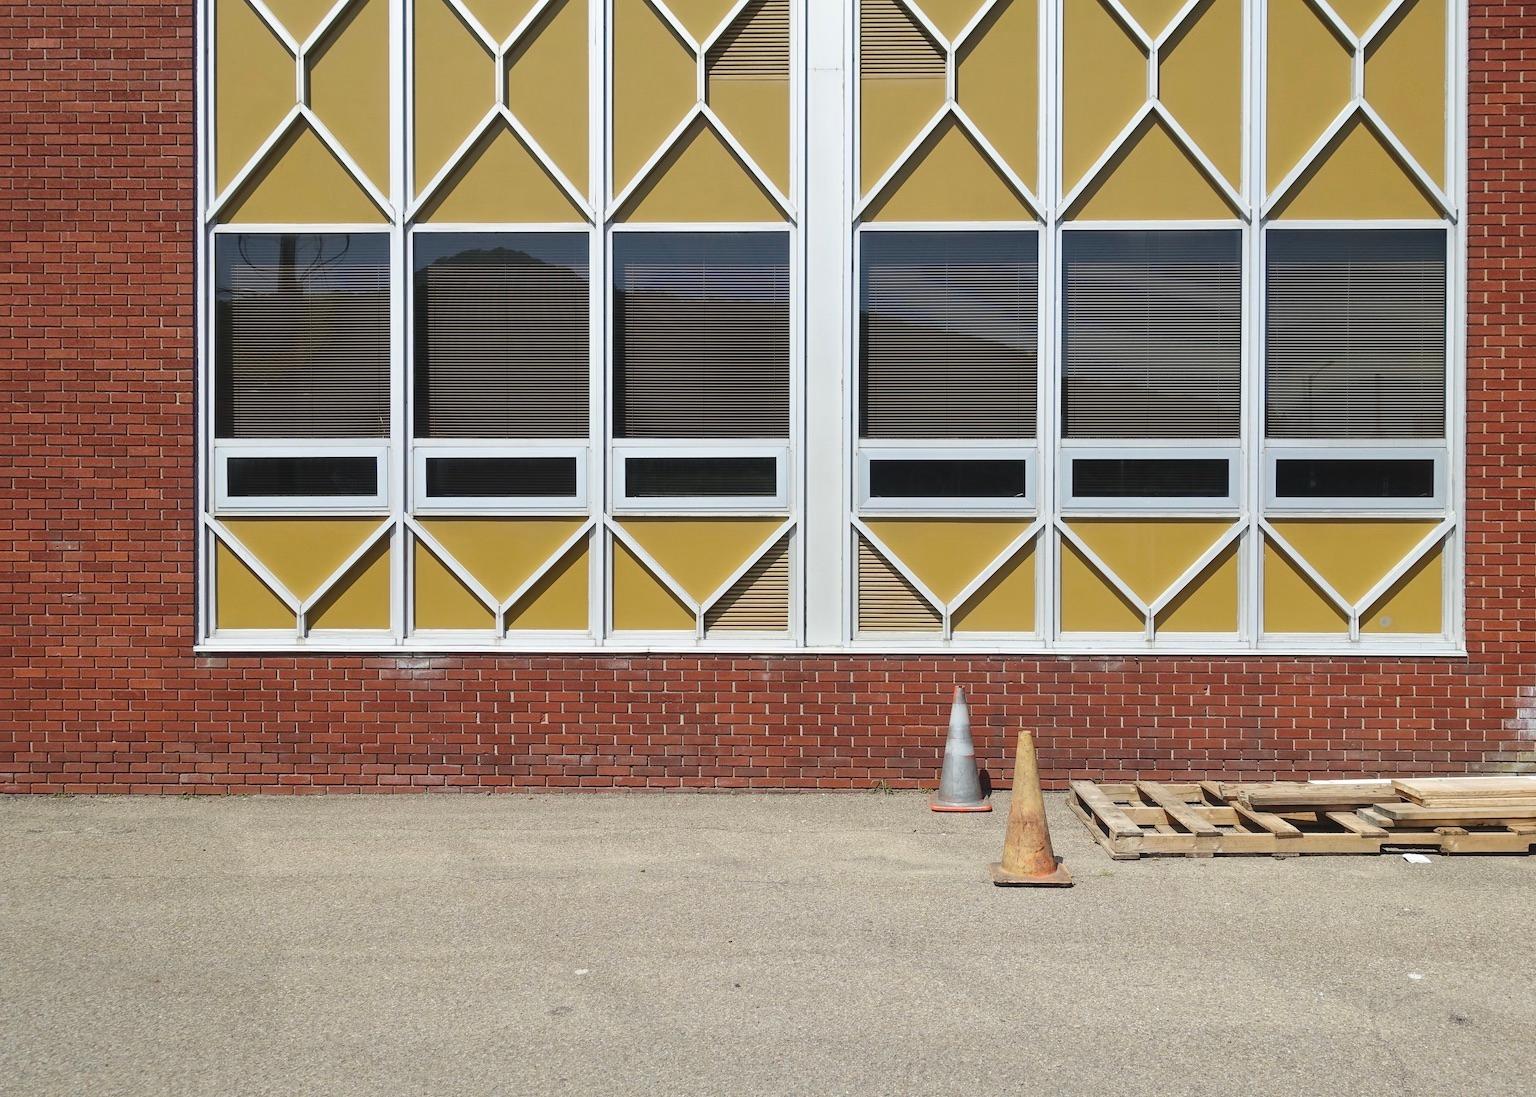 Ochre Windows, Bradford, PA, 2022

Bob Hambly has that rare talent to find the uncanny, yet familiar, and compose it into an extraordinary photograph. The formalism of his work, coupled with the irony of place, makes for a series of photographs with